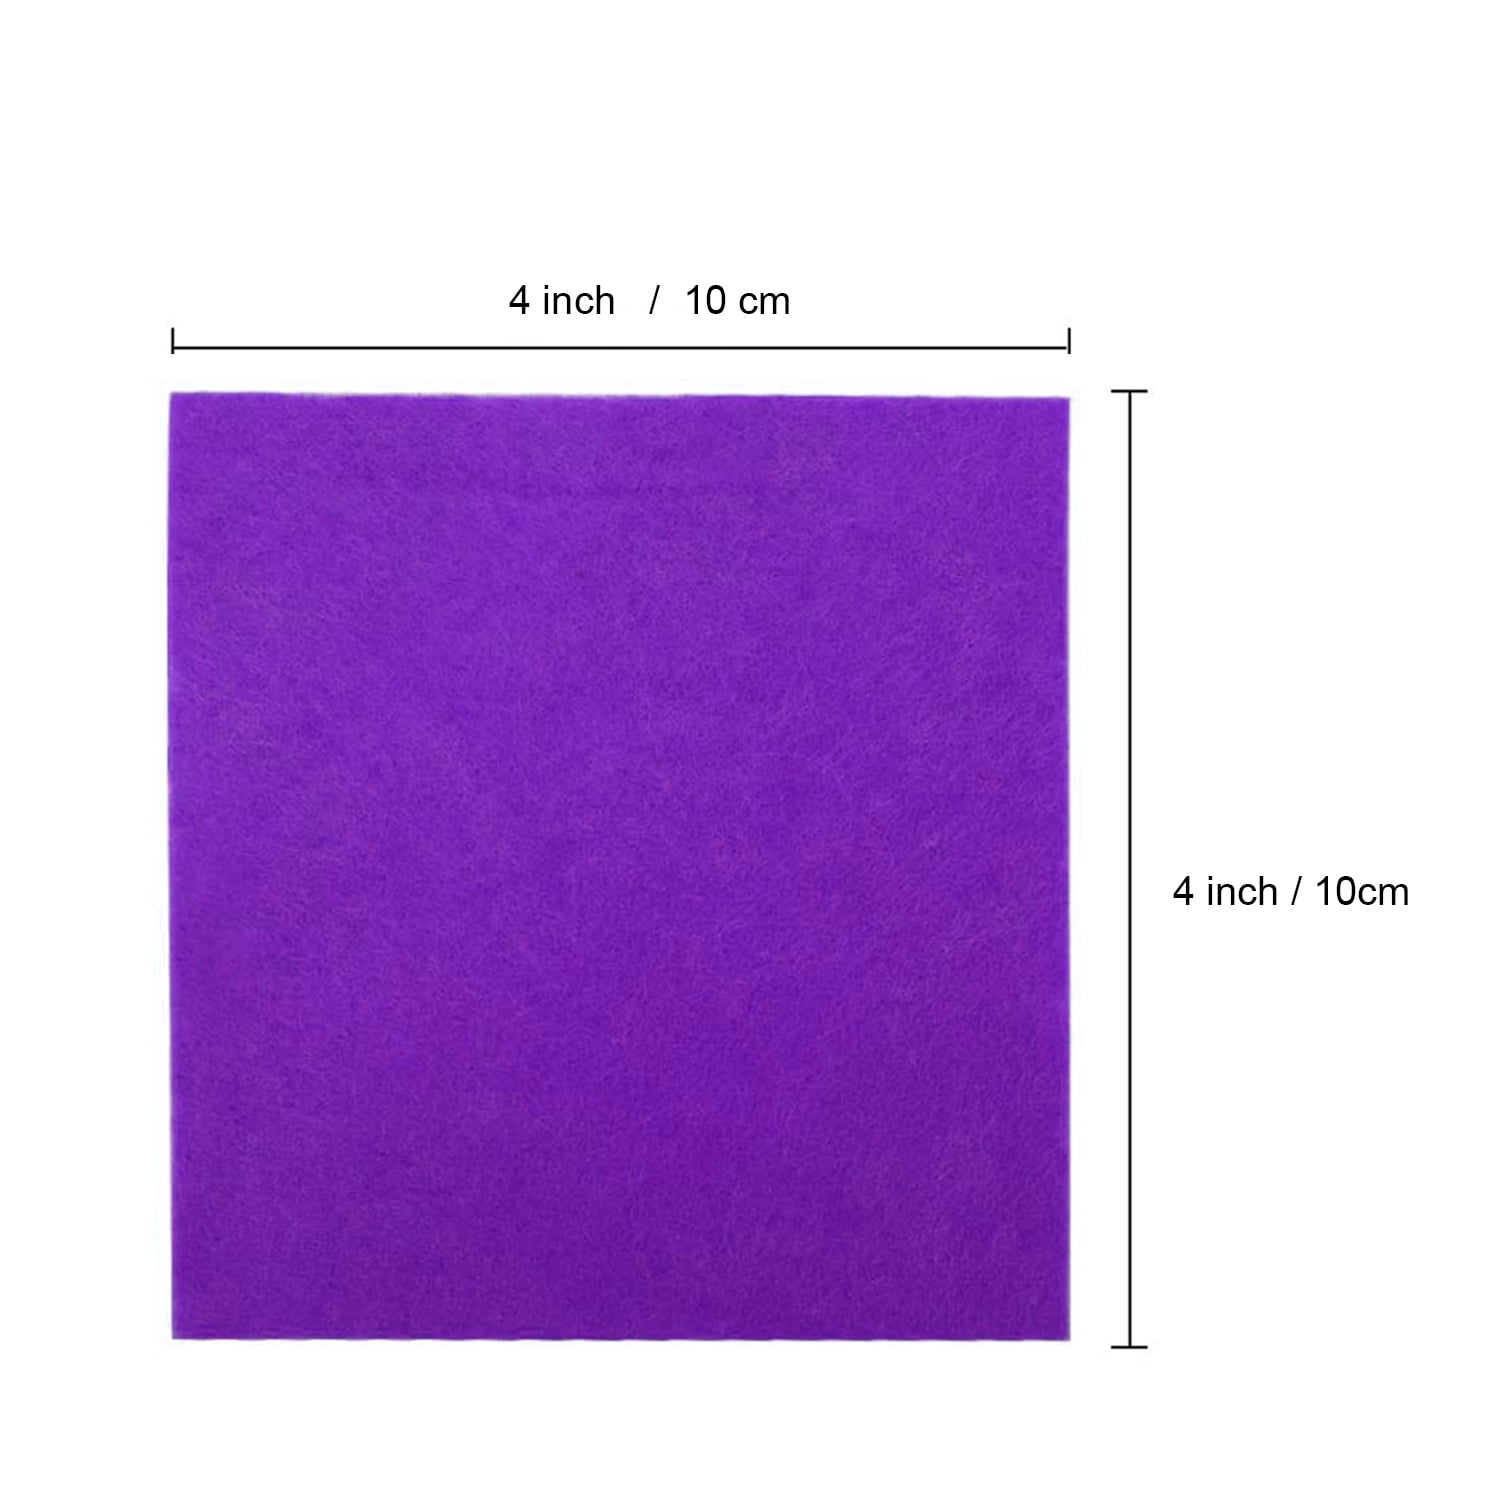 Soft Felt Squares, 4x4 Inches, 48PCS in 12 Colors - Assorted Polyester Felt  Sheets for DIY, Craft, Sewing, Patches and More | 2mm Thickness - Multiple